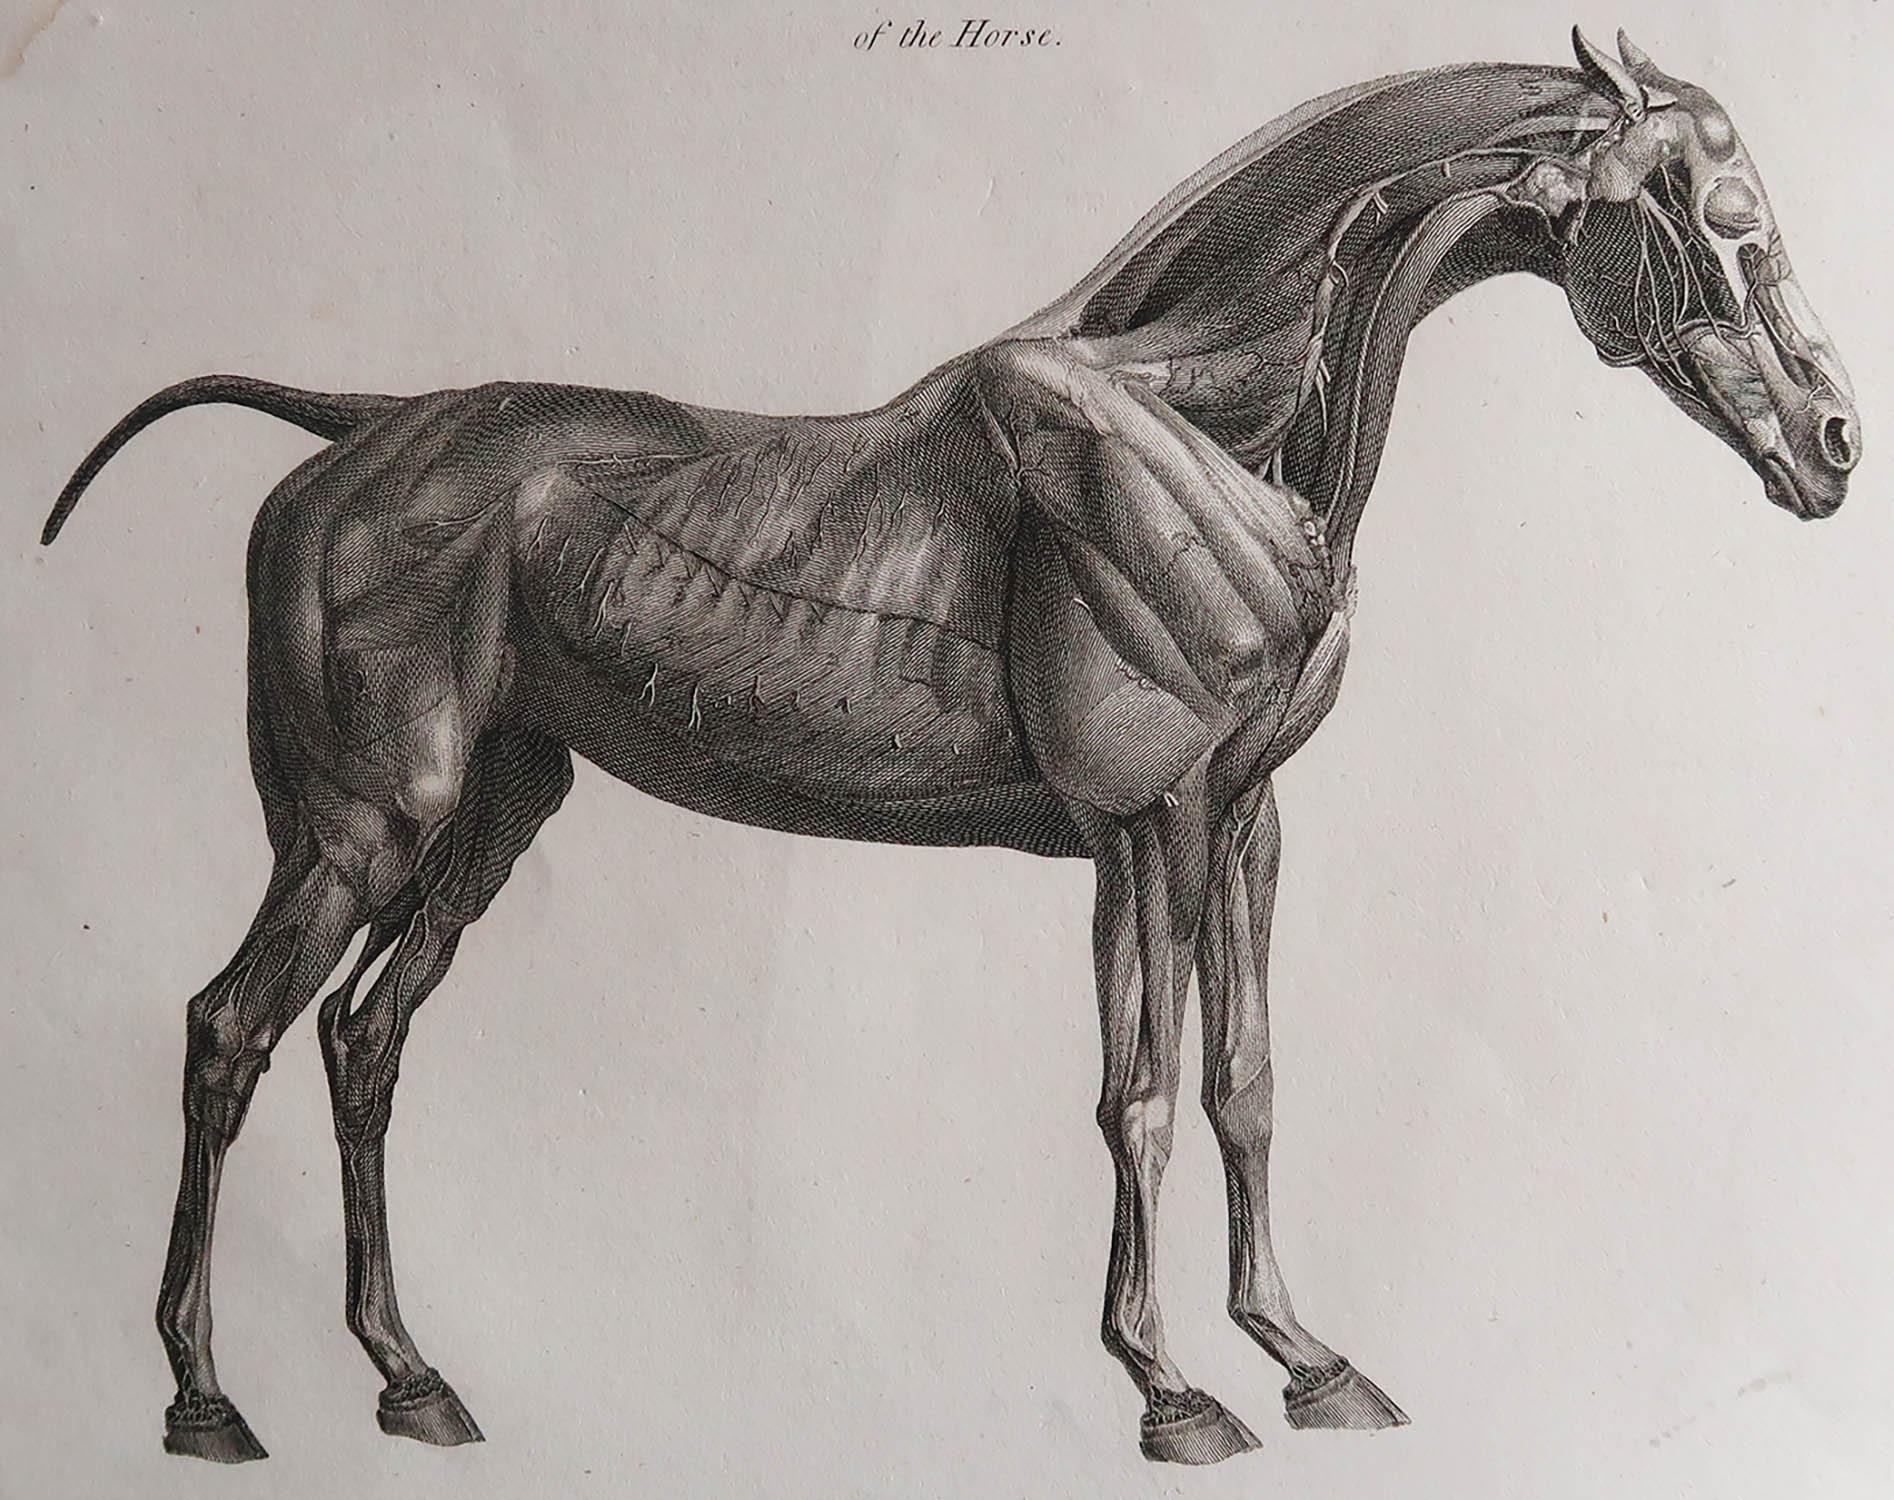 Great anatomical image of A Horse

Copper-plate engraving by Milton

Published by Longman & Rees, London

Dated 1802

Slight mark on right hand side

Unframed.

Free shipping. 



